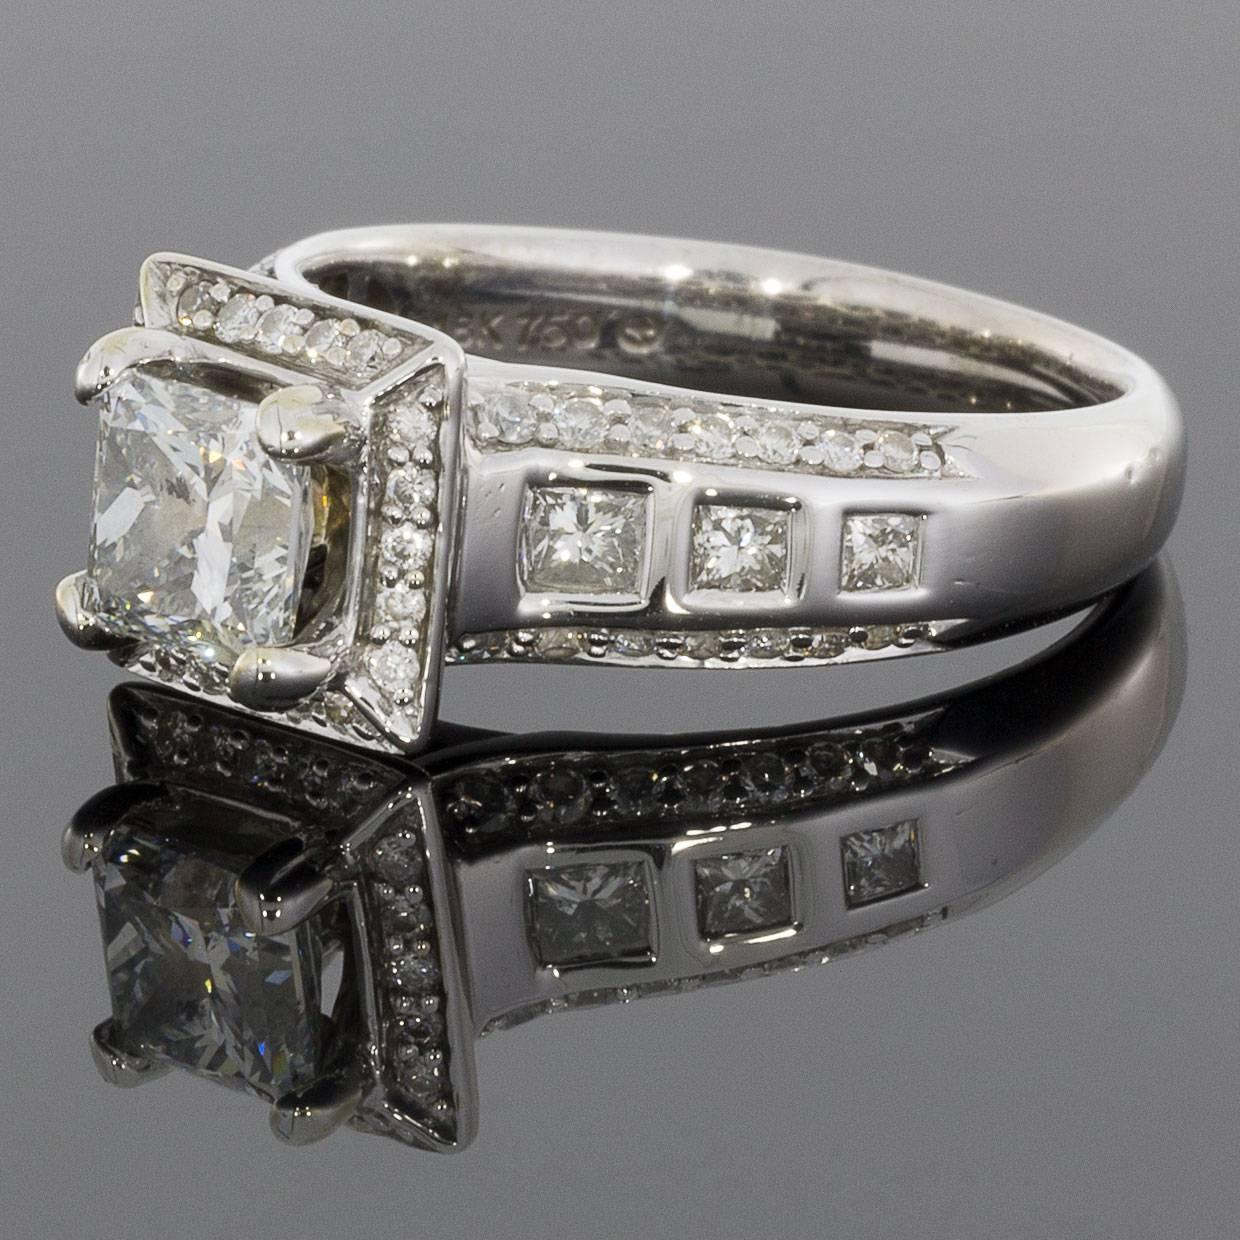 This stunning halo engagement ring has a combined total weight of 1.43 carats and features a center princess cut diamond that weighs approximately .85 carat and grades as G/I1 in quality. This center diamond is split prong set, surrounded by a halo